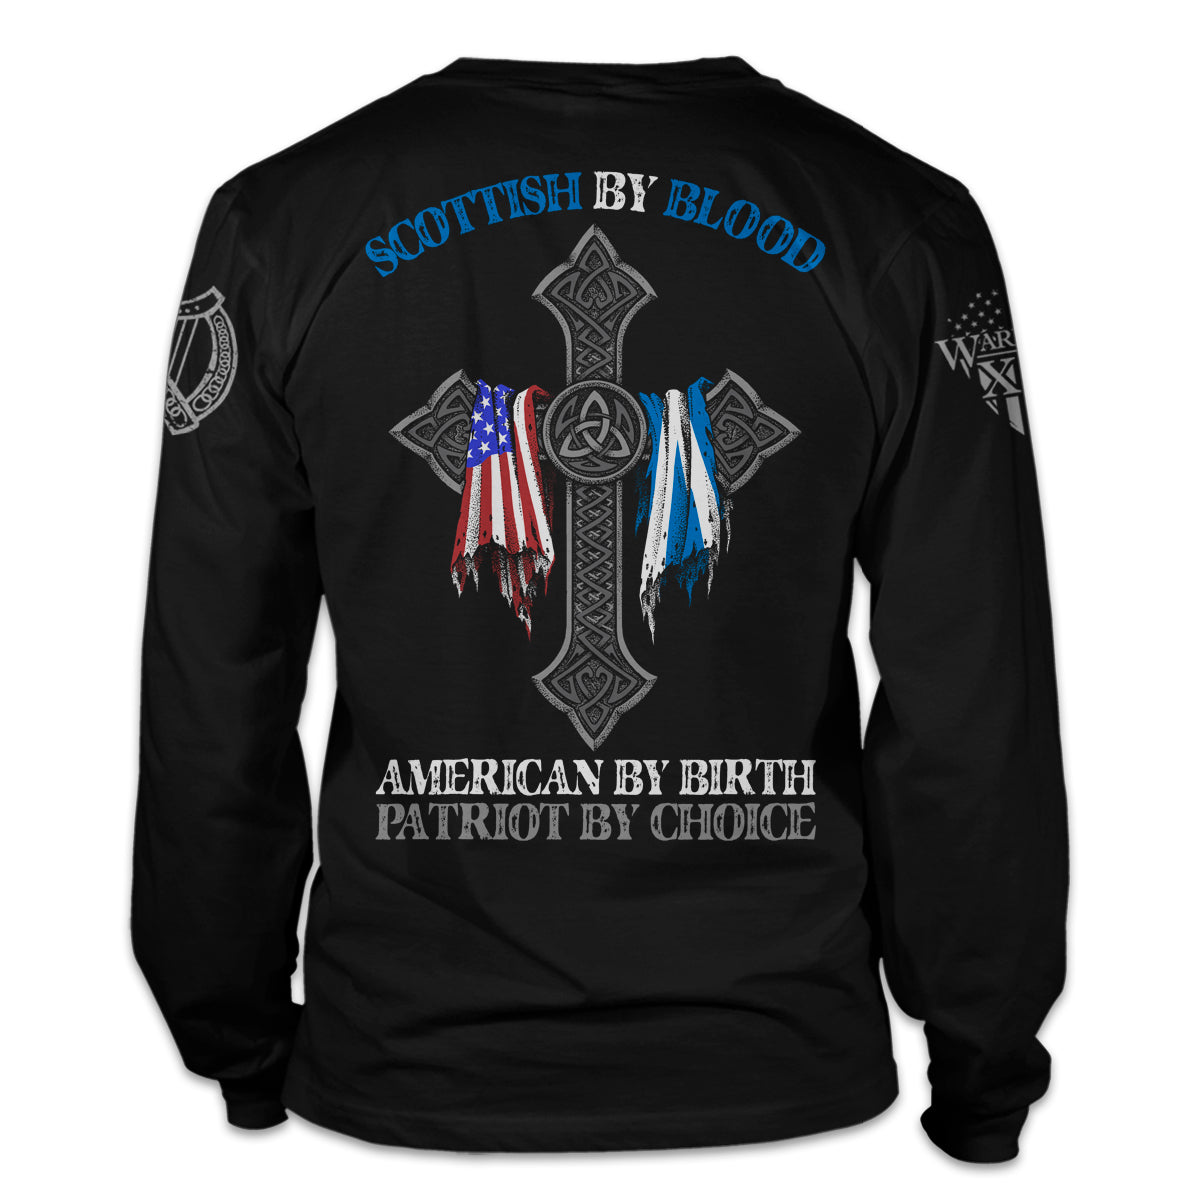 A black long sleeve shirt with the words "Scottish by blood, American by birth, patriot by choice" with a cross holding the American and Scottish flag printed on the back of the shirt.